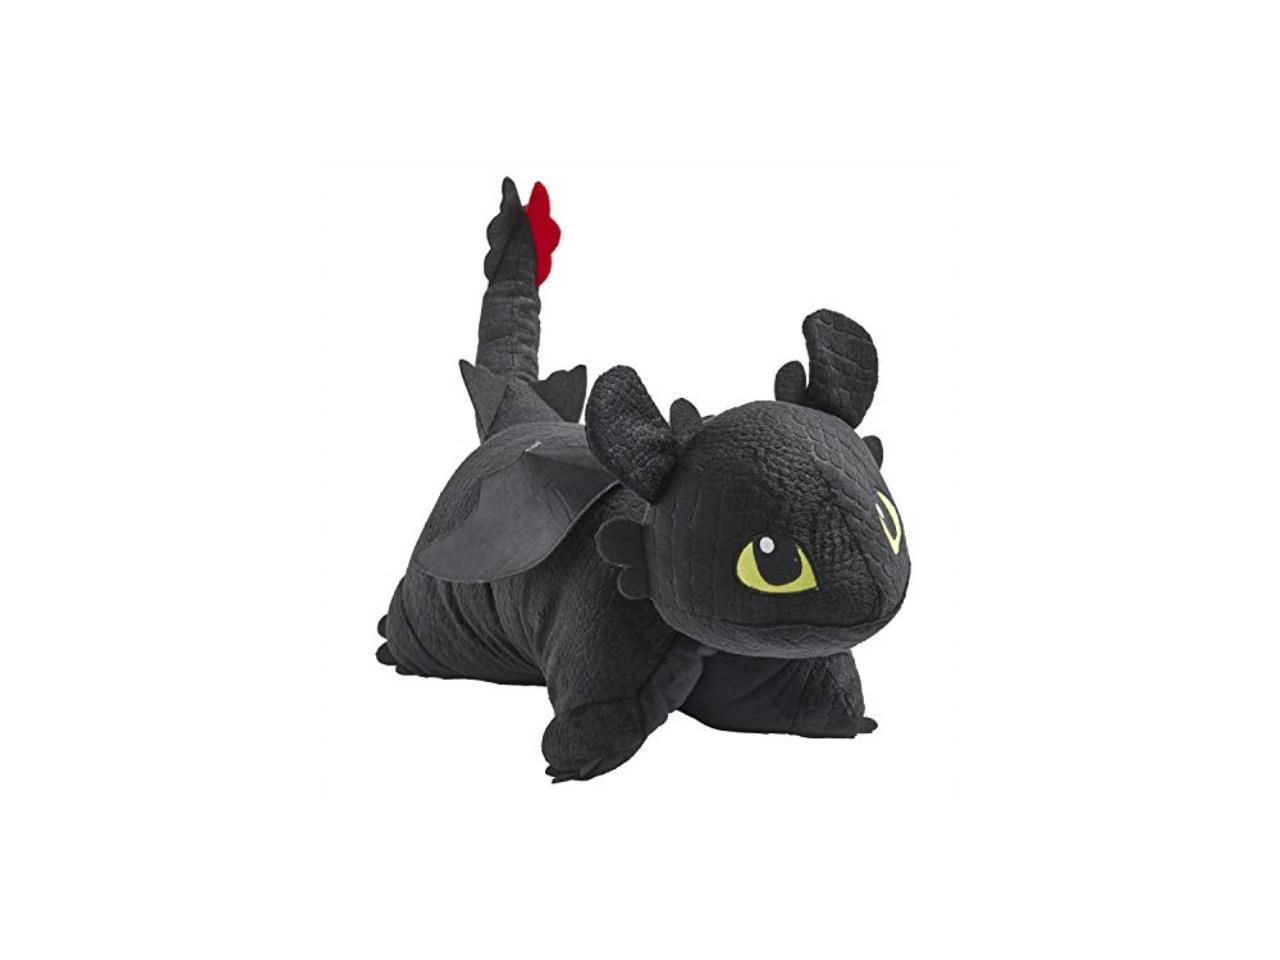 Pillow Pets NBCUniversal How to Train Your Dragon Toothless 16 Stuffed Animal Plush Toy